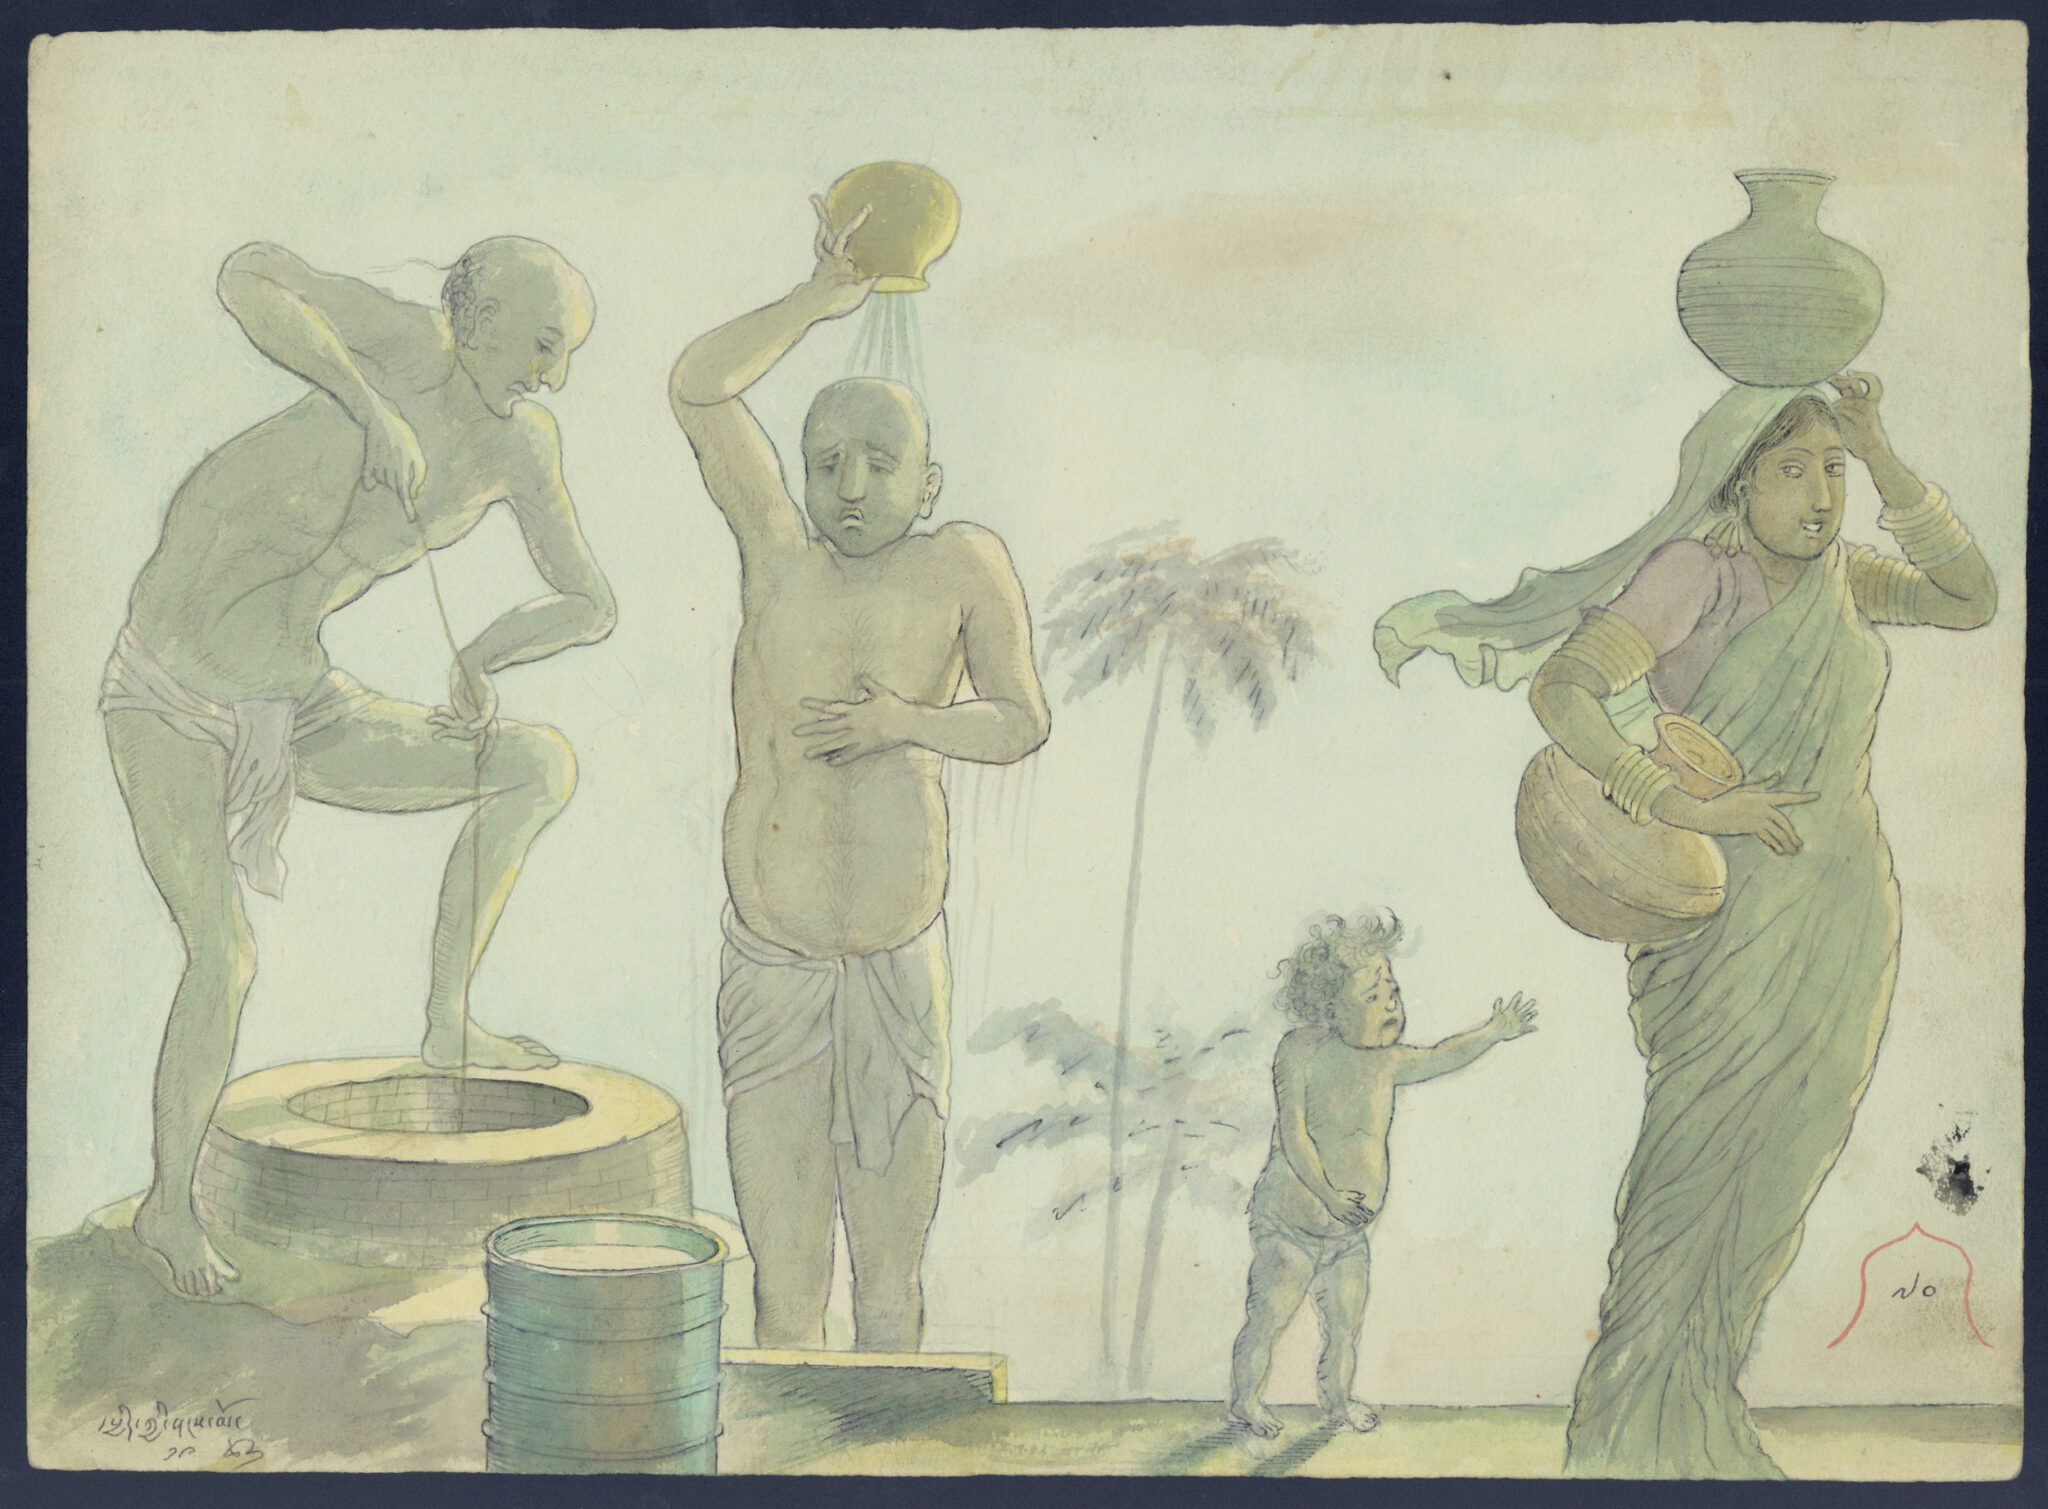 Watercolor depicting two men washing themselves and woman carrying vessel on head, followed by infant